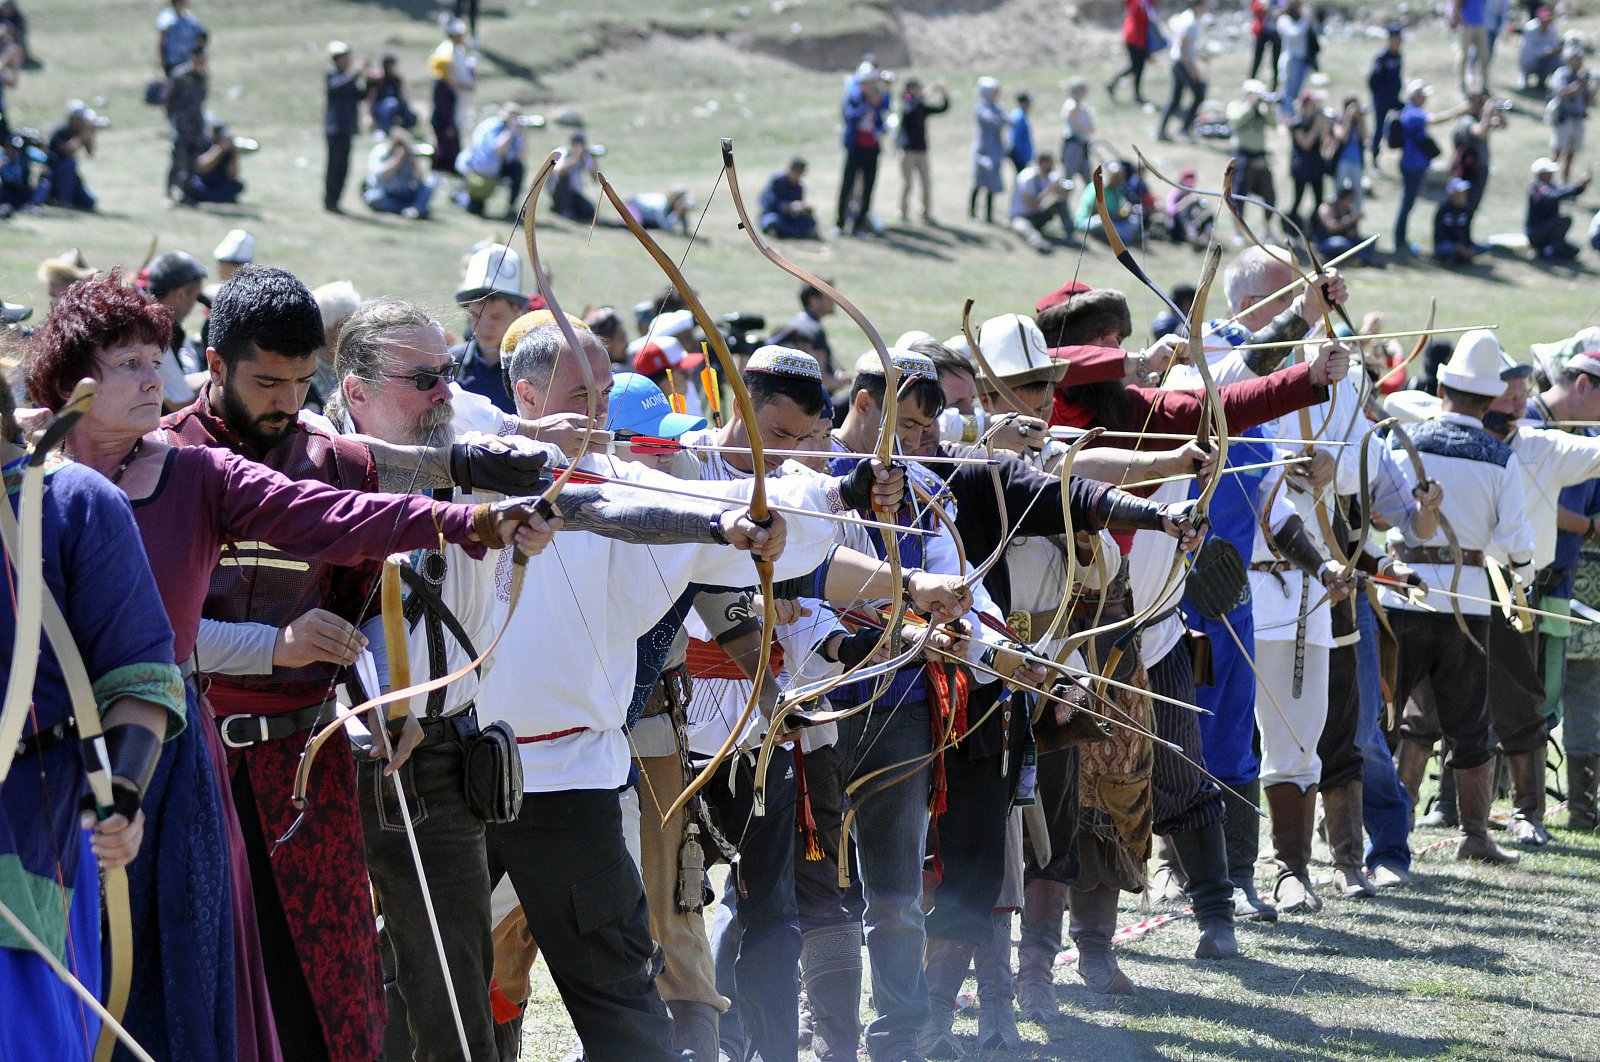 Last year's World Nomad Games was held in Kyrgyzstan. (AA Photo)